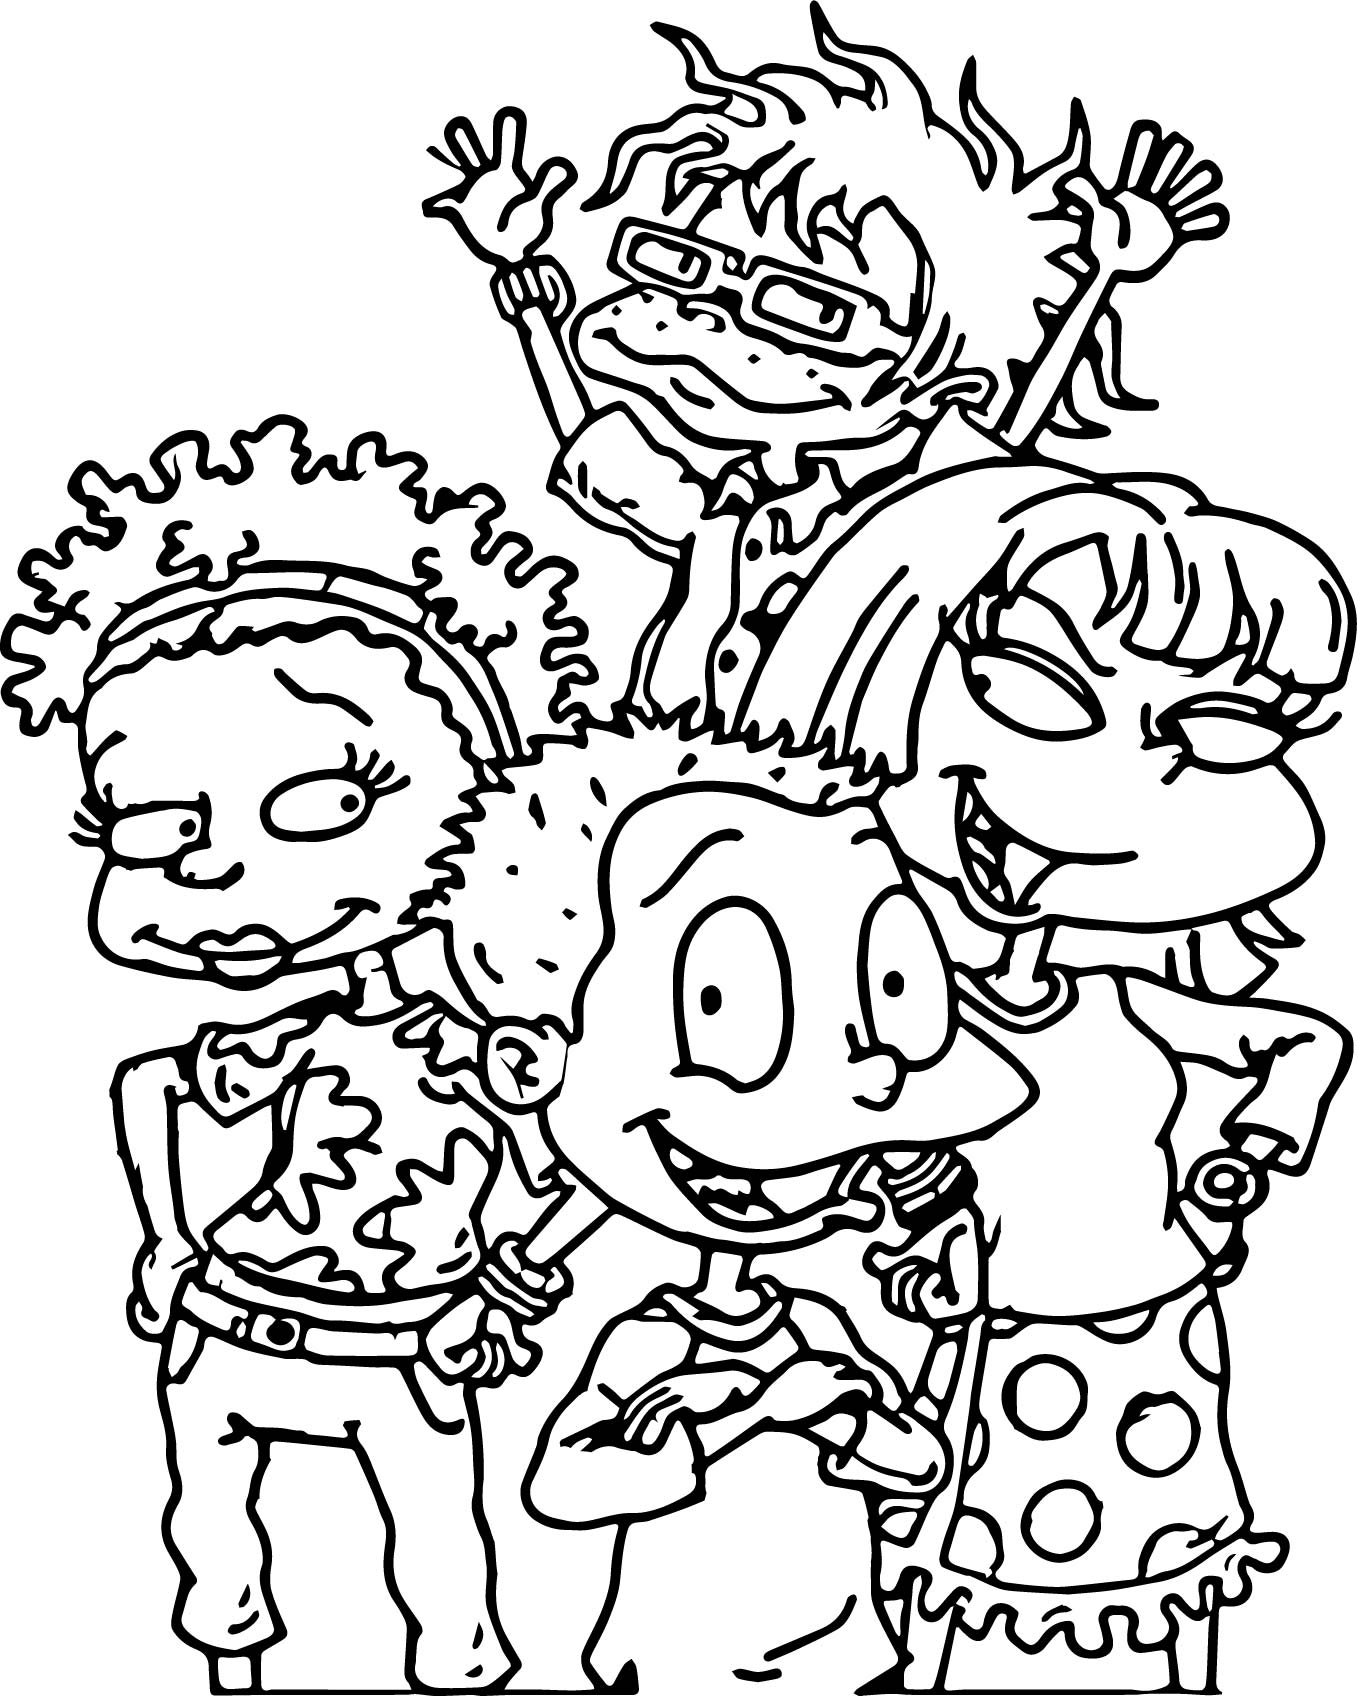 All Grown Up President Kids Coloring Page | Wecoloringpage.com